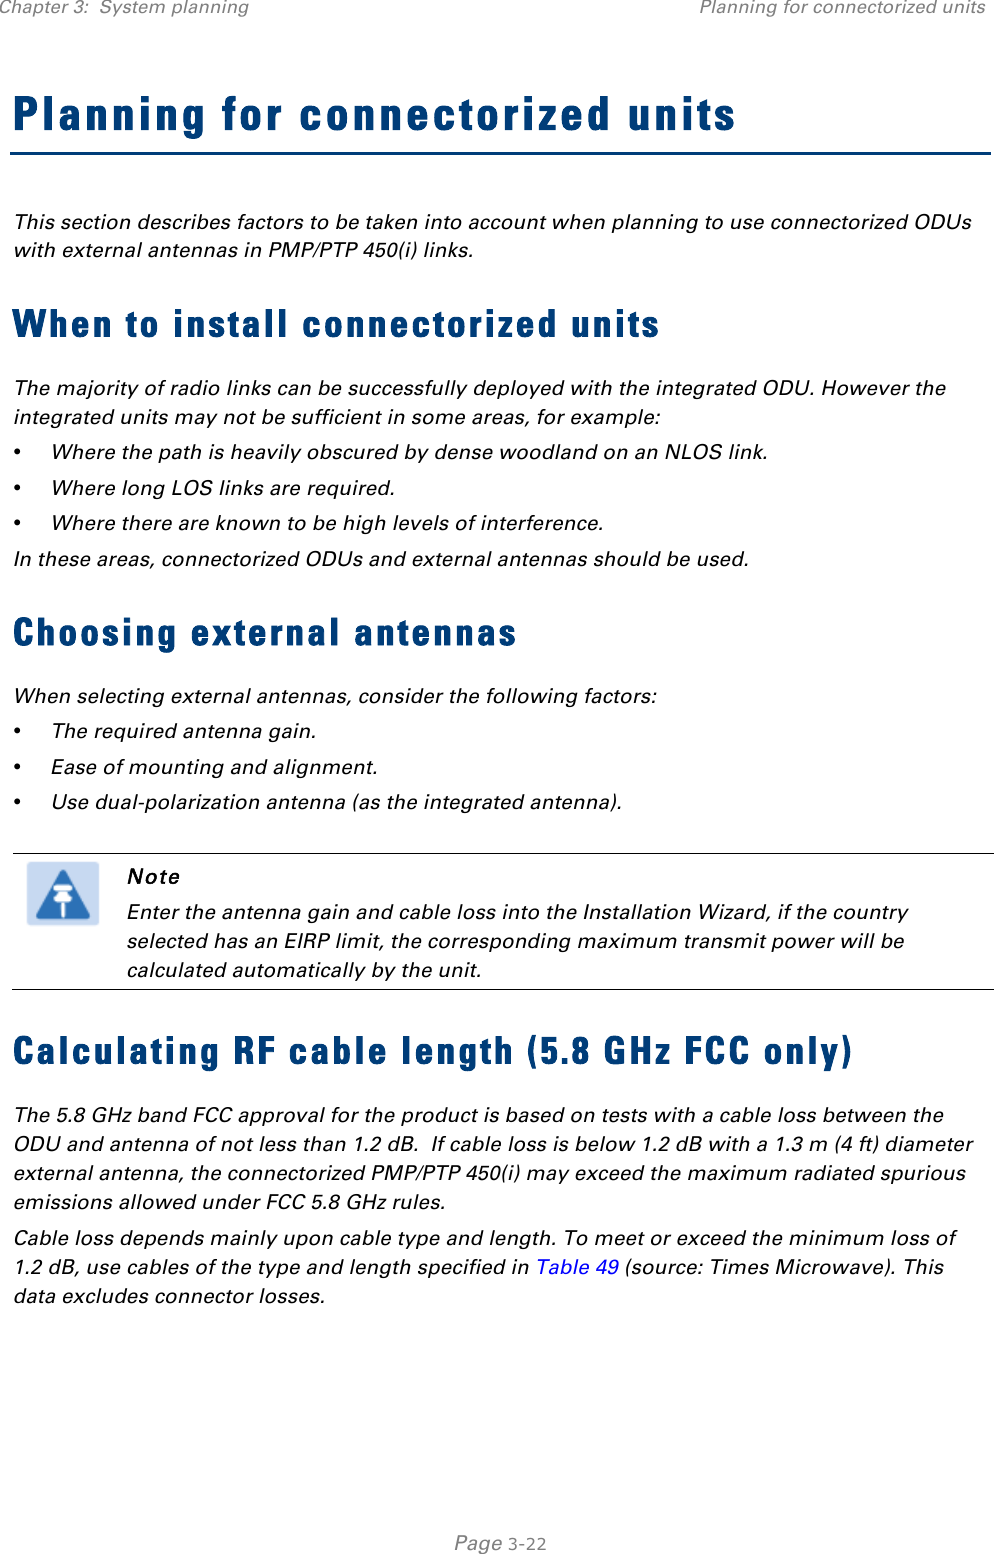 Chapter 3:  System planning Planning for connectorized units   Page 3-22 Planning for connectorized units This section describes factors to be taken into account when planning to use connectorized ODUs with external antennas in PMP/PTP 450(i) links. When to install connectorized units The majority of radio links can be successfully deployed with the integrated ODU. However the integrated units may not be sufficient in some areas, for example: • Where the path is heavily obscured by dense woodland on an NLOS link. • Where long LOS links are required.  • Where there are known to be high levels of interference. In these areas, connectorized ODUs and external antennas should be used. Choosing external antennas When selecting external antennas, consider the following factors: • The required antenna gain. • Ease of mounting and alignment. • Use dual-polarization antenna (as the integrated antenna).   Note Enter the antenna gain and cable loss into the Installation Wizard, if the country selected has an EIRP limit, the corresponding maximum transmit power will be calculated automatically by the unit. Calculating RF cable length (5.8 GHz FCC only) The 5.8 GHz band FCC approval for the product is based on tests with a cable loss between the ODU and antenna of not less than 1.2 dB.  If cable loss is below 1.2 dB with a 1.3 m (4 ft) diameter external antenna, the connectorized PMP/PTP 450(i) may exceed the maximum radiated spurious emissions allowed under FCC 5.8 GHz rules. Cable loss depends mainly upon cable type and length. To meet or exceed the minimum loss of 1.2 dB, use cables of the type and length specified in Table 49 (source: Times Microwave). This data excludes connector losses.  